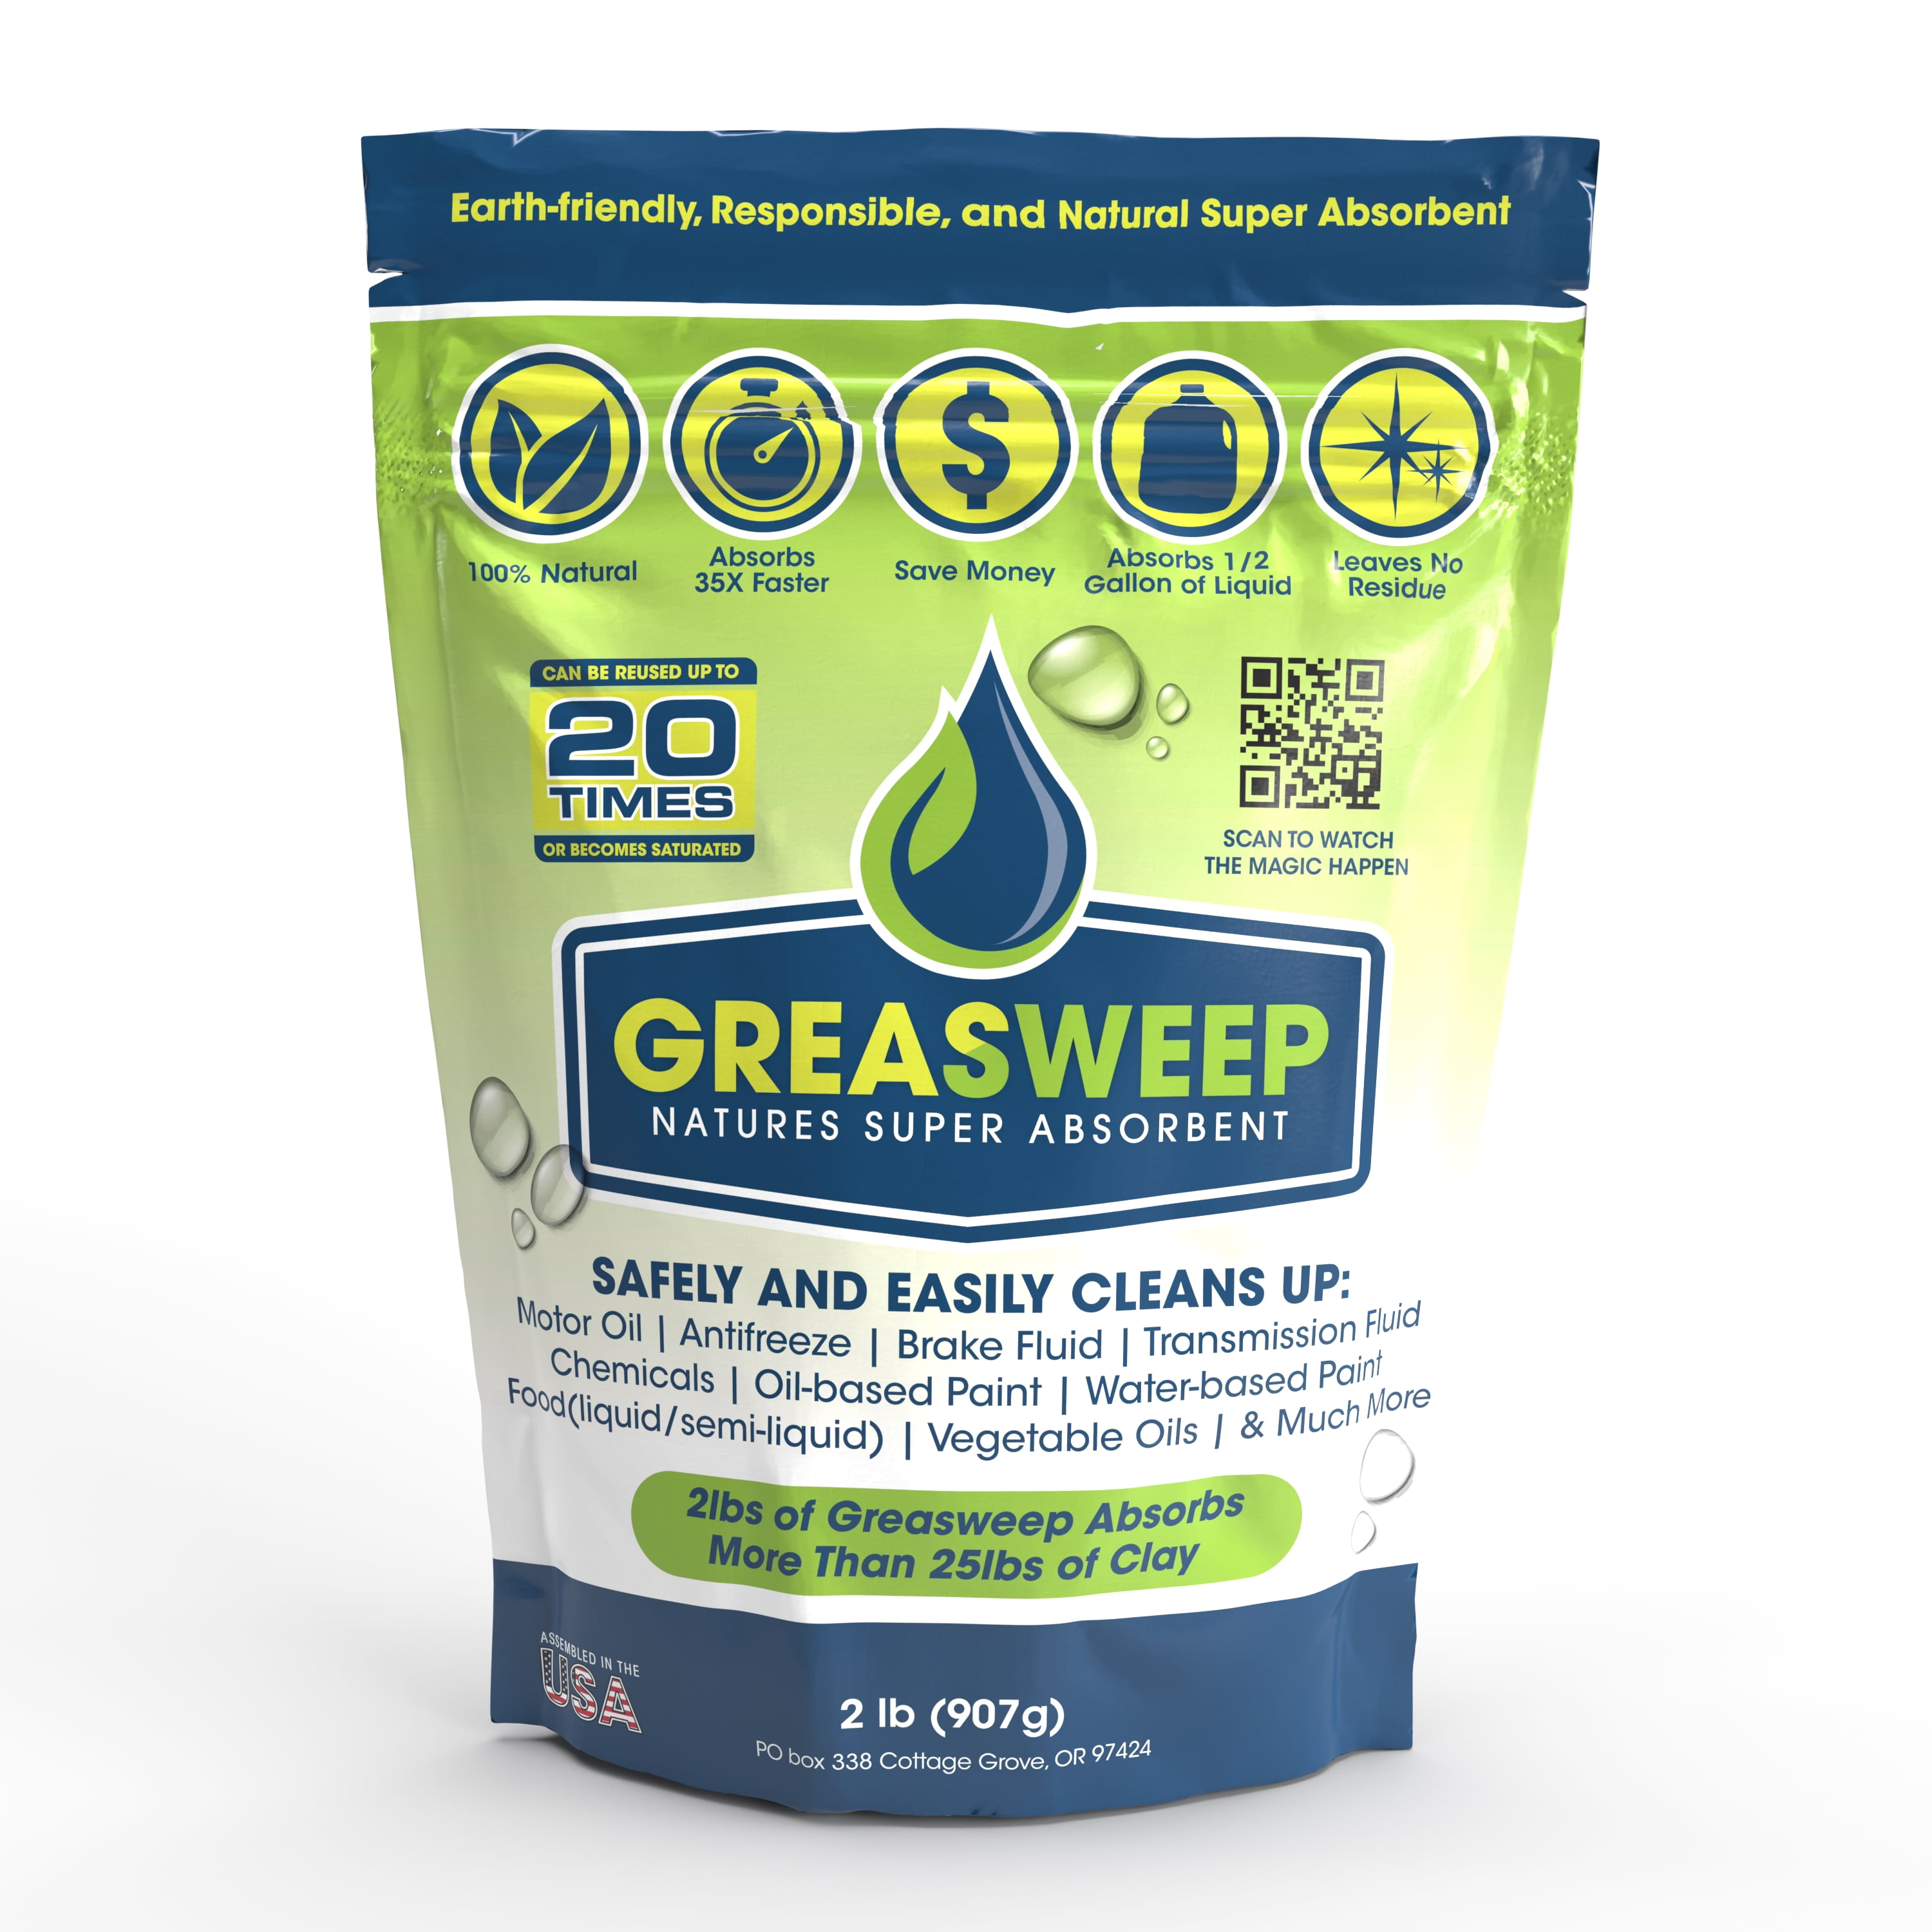 Greasweep Super Absorbent Powder, All Purpose Cleaners, 2 Lb Bag